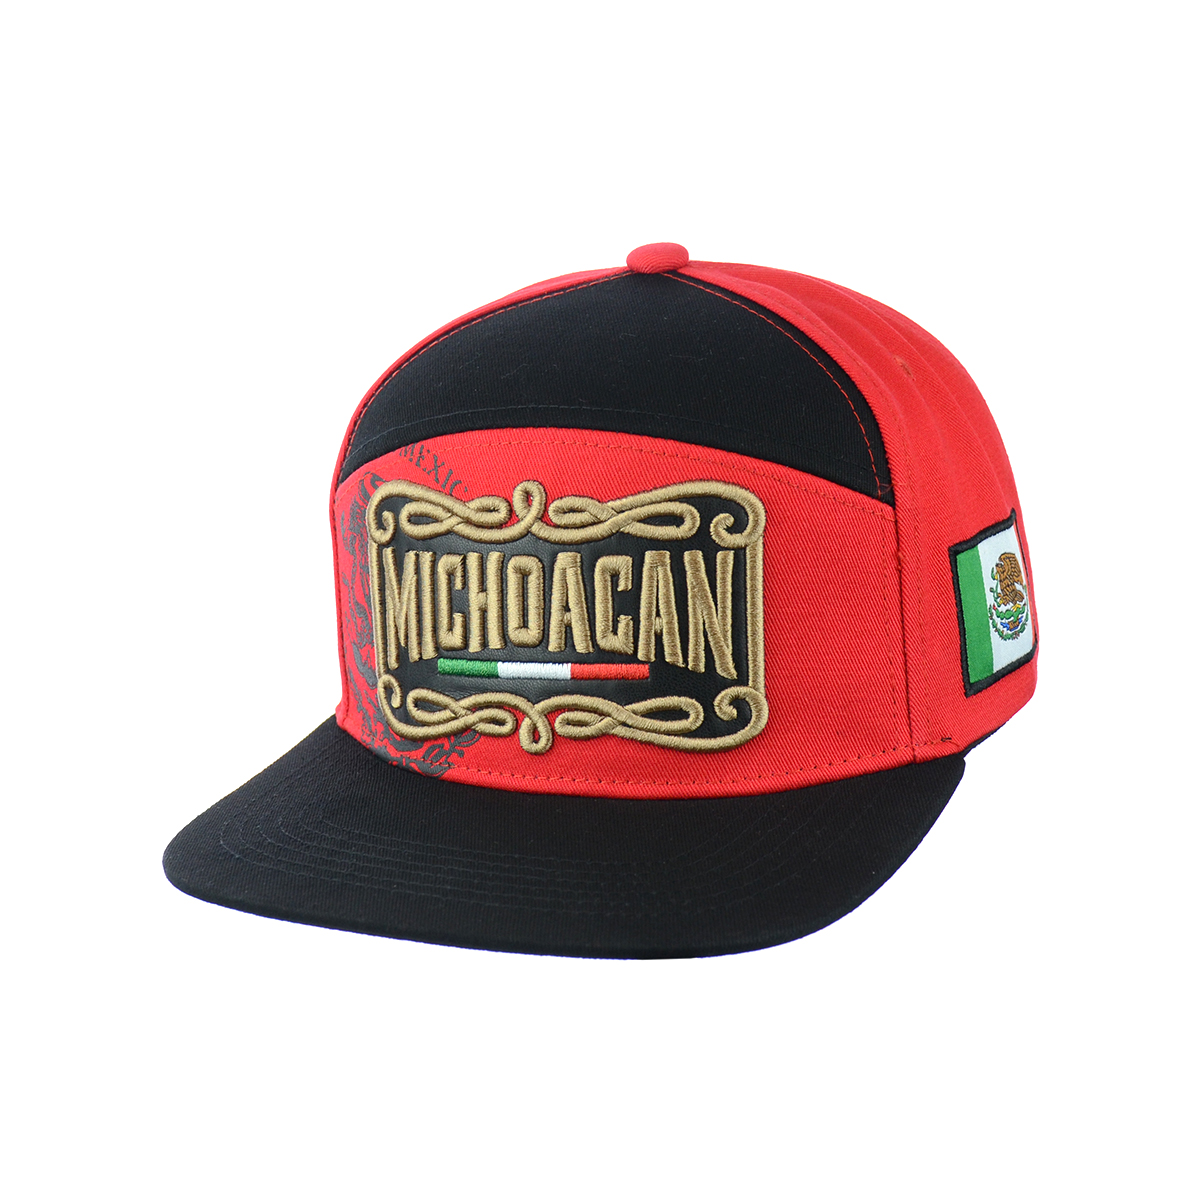 MICHOACAN Embroidered Snapback Hat 100% Cotton